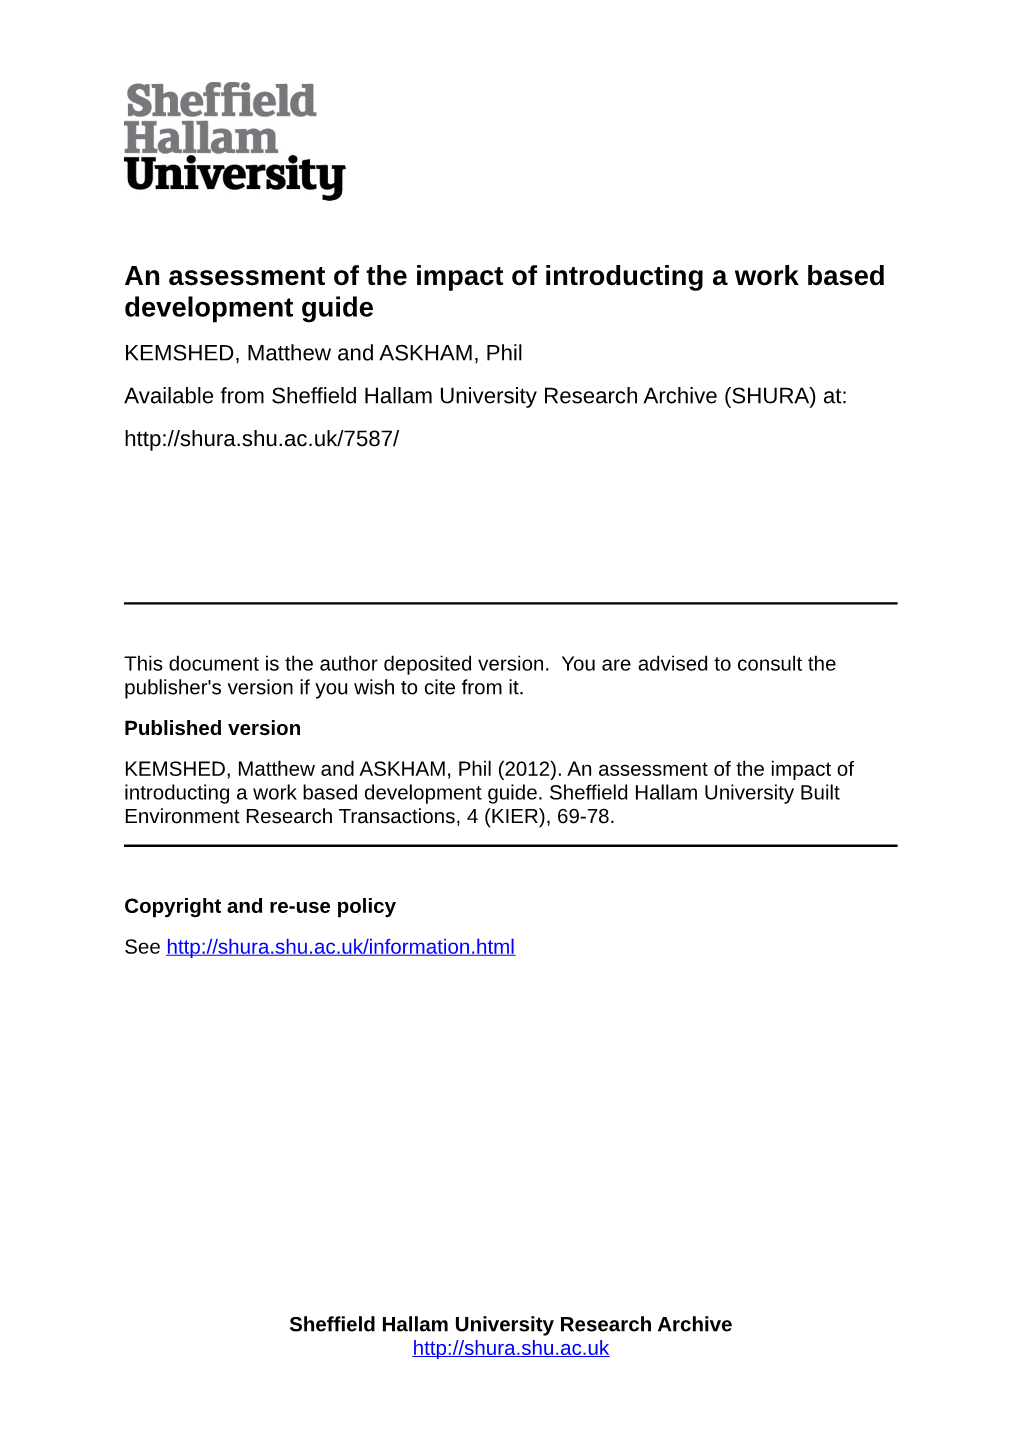 An Assessment of the Impact of Introducting a Work Based